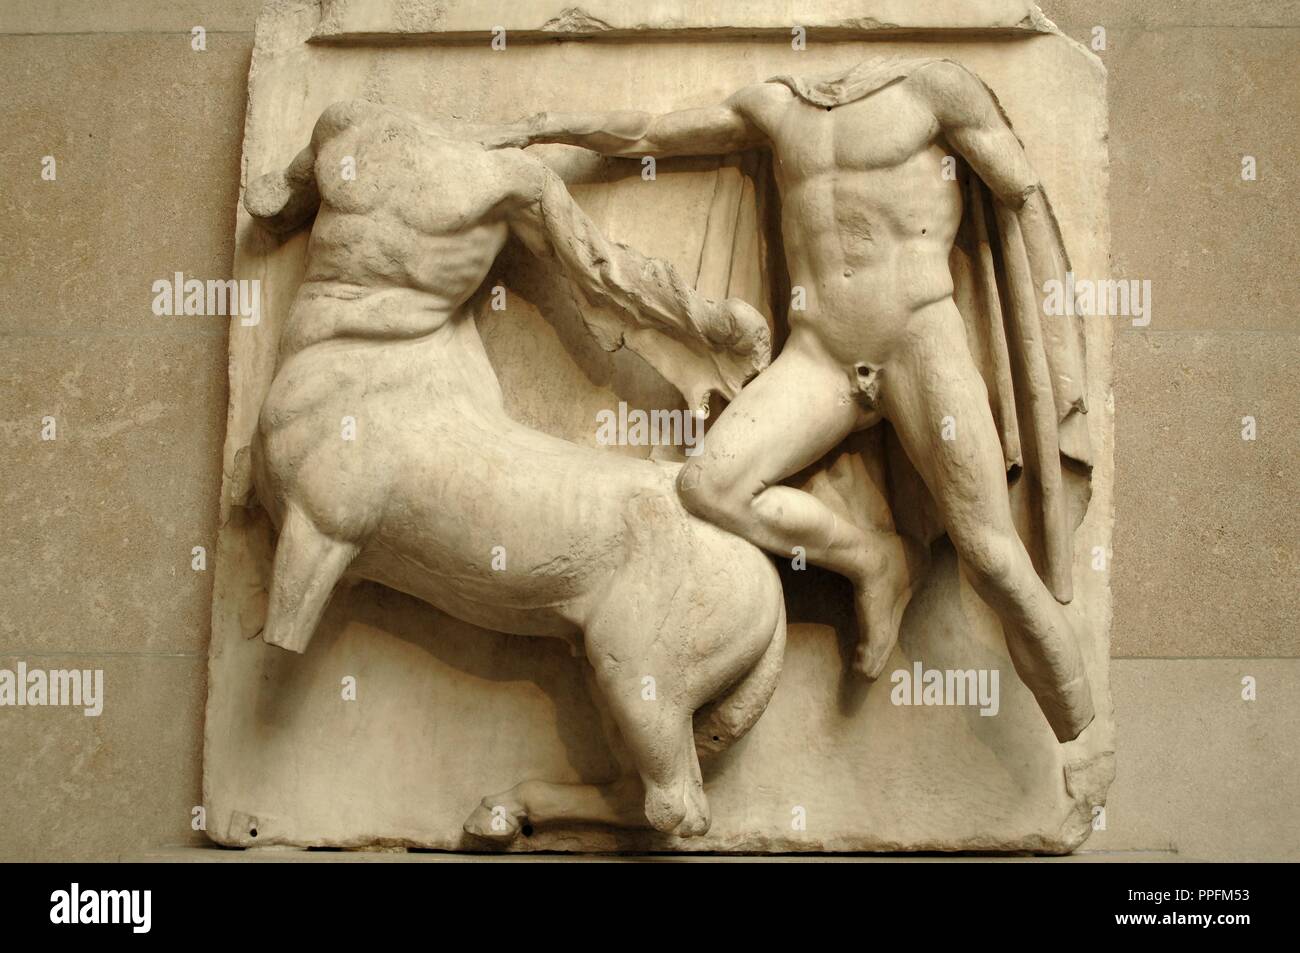 Metope III from the Parthenon marbles depicting part of the battle between the Centaurs and the Lapiths. 5th century BC. Athens. British Museum. London. United Kingdom. Stock Photo